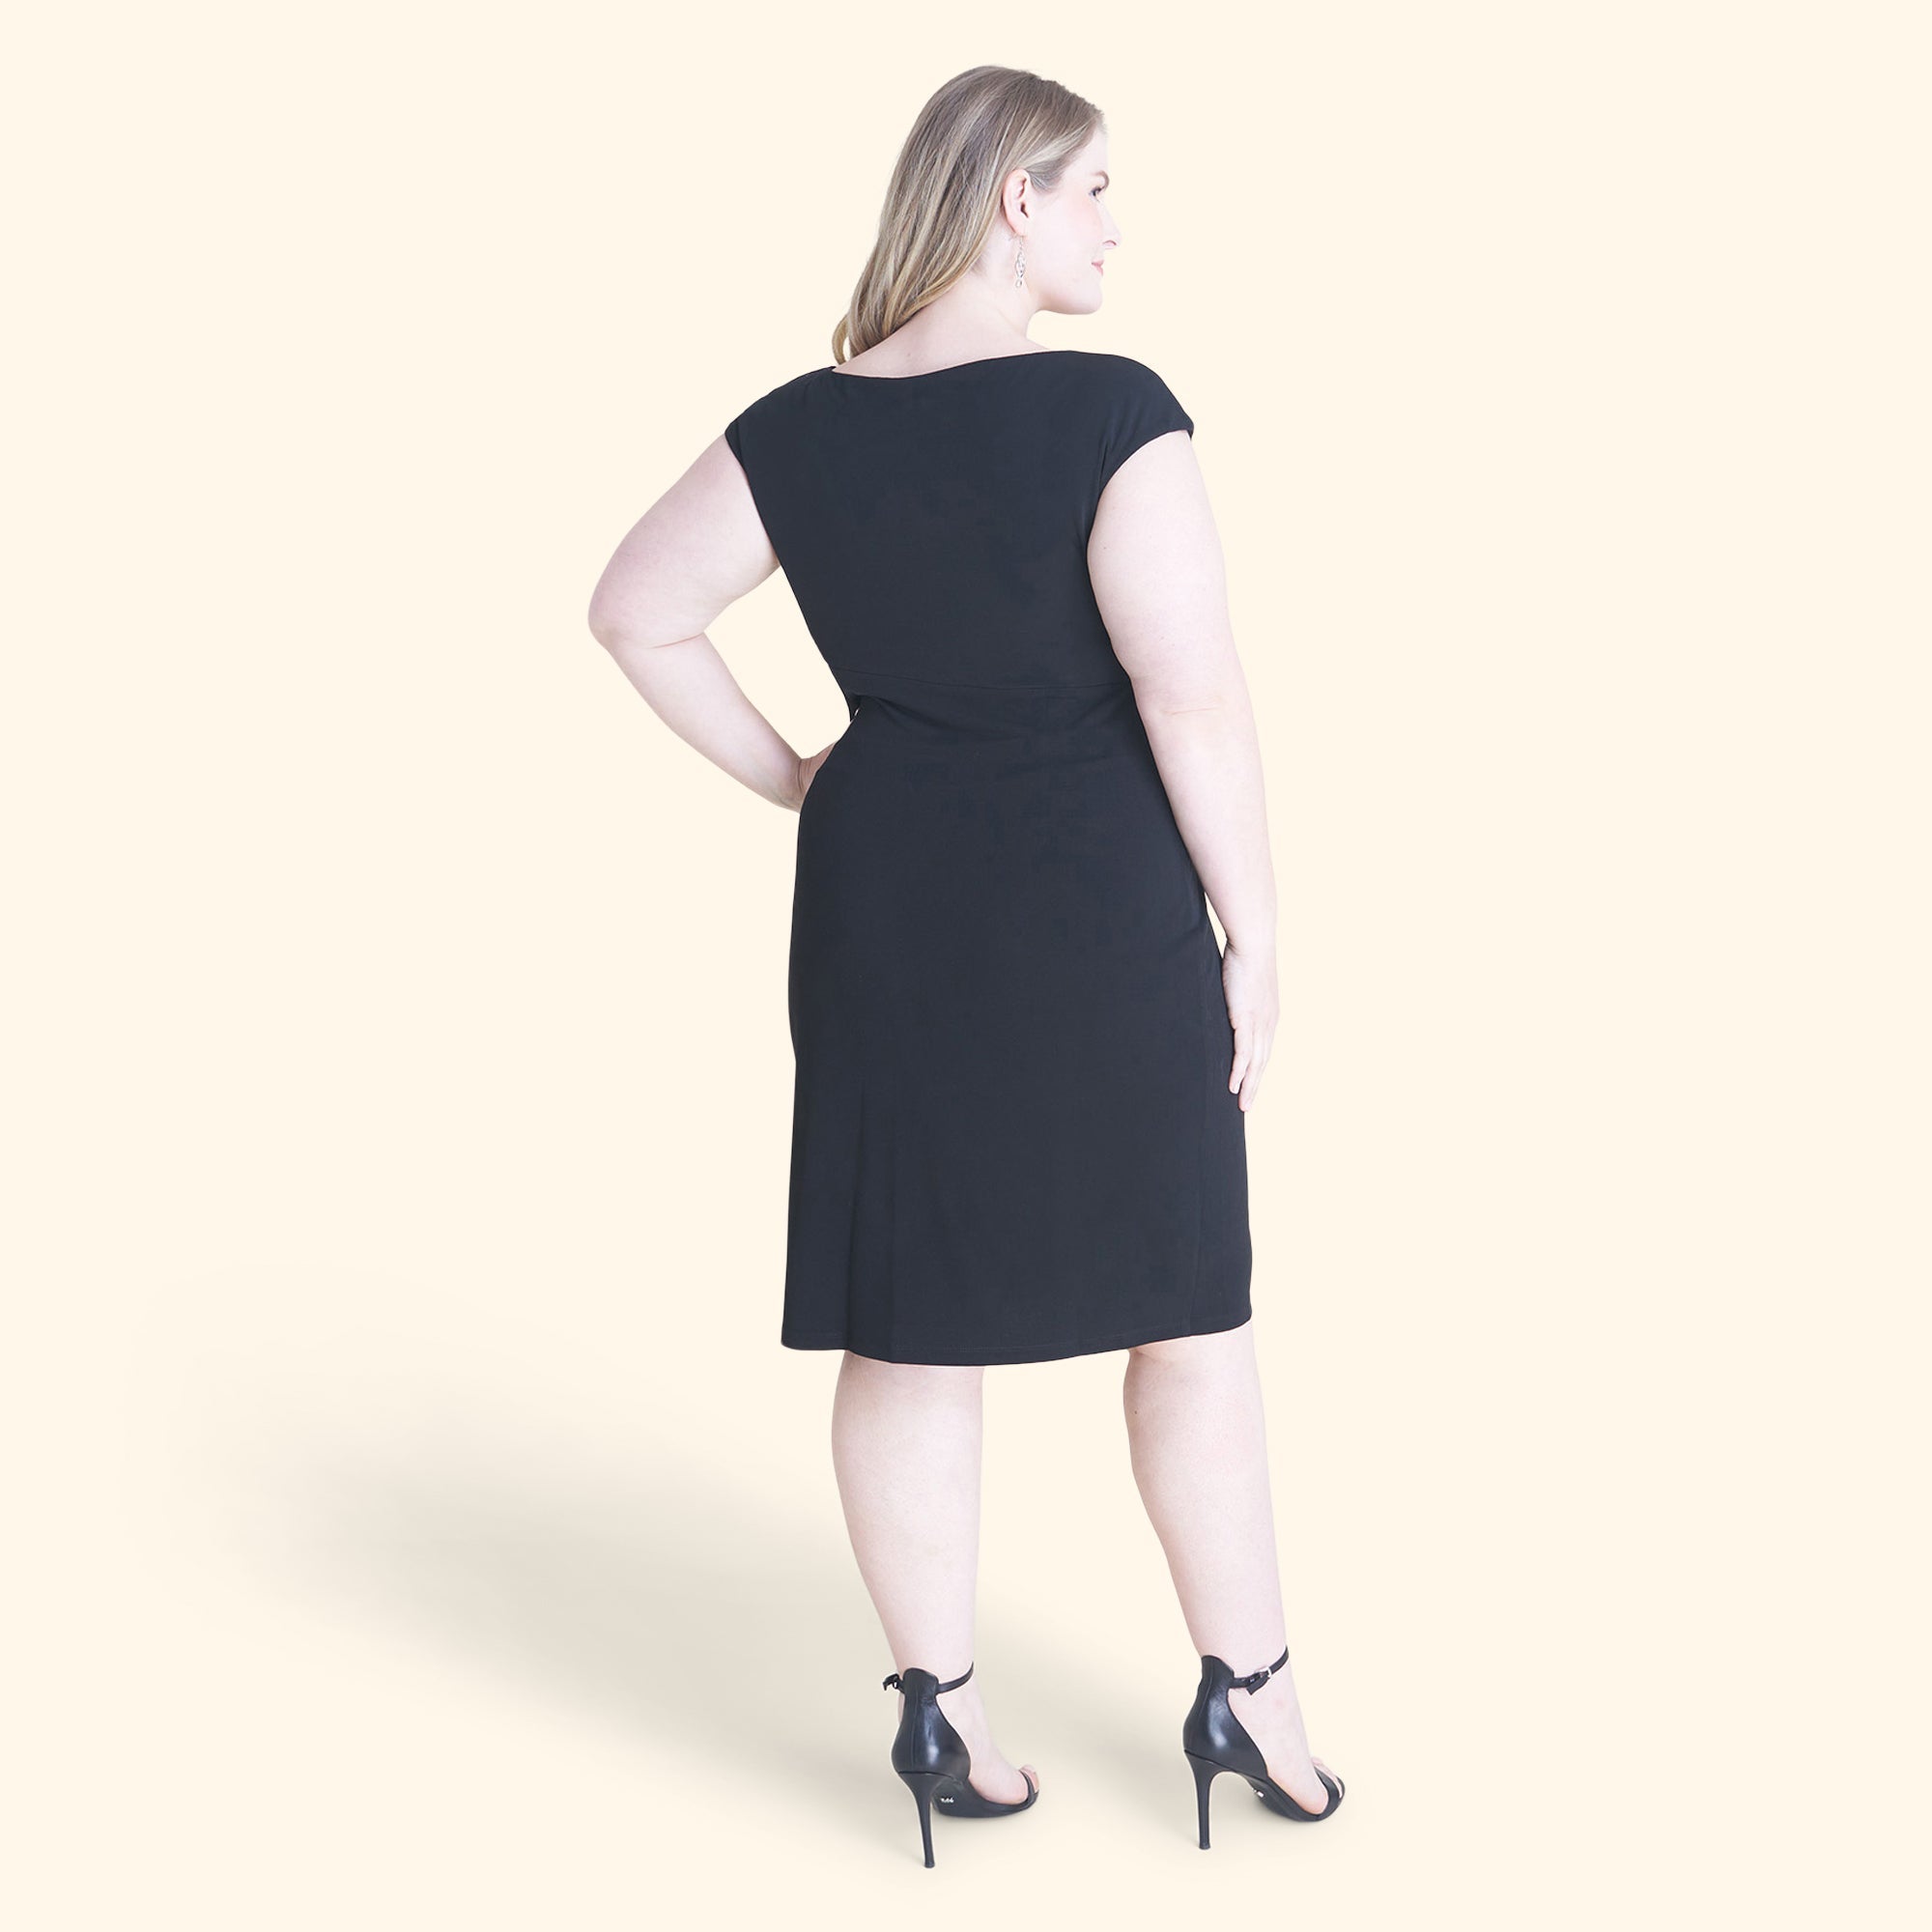 Woman posing wearing Black Lisa Sleeveless Black Faux Wrap Dress from Connected Apparel